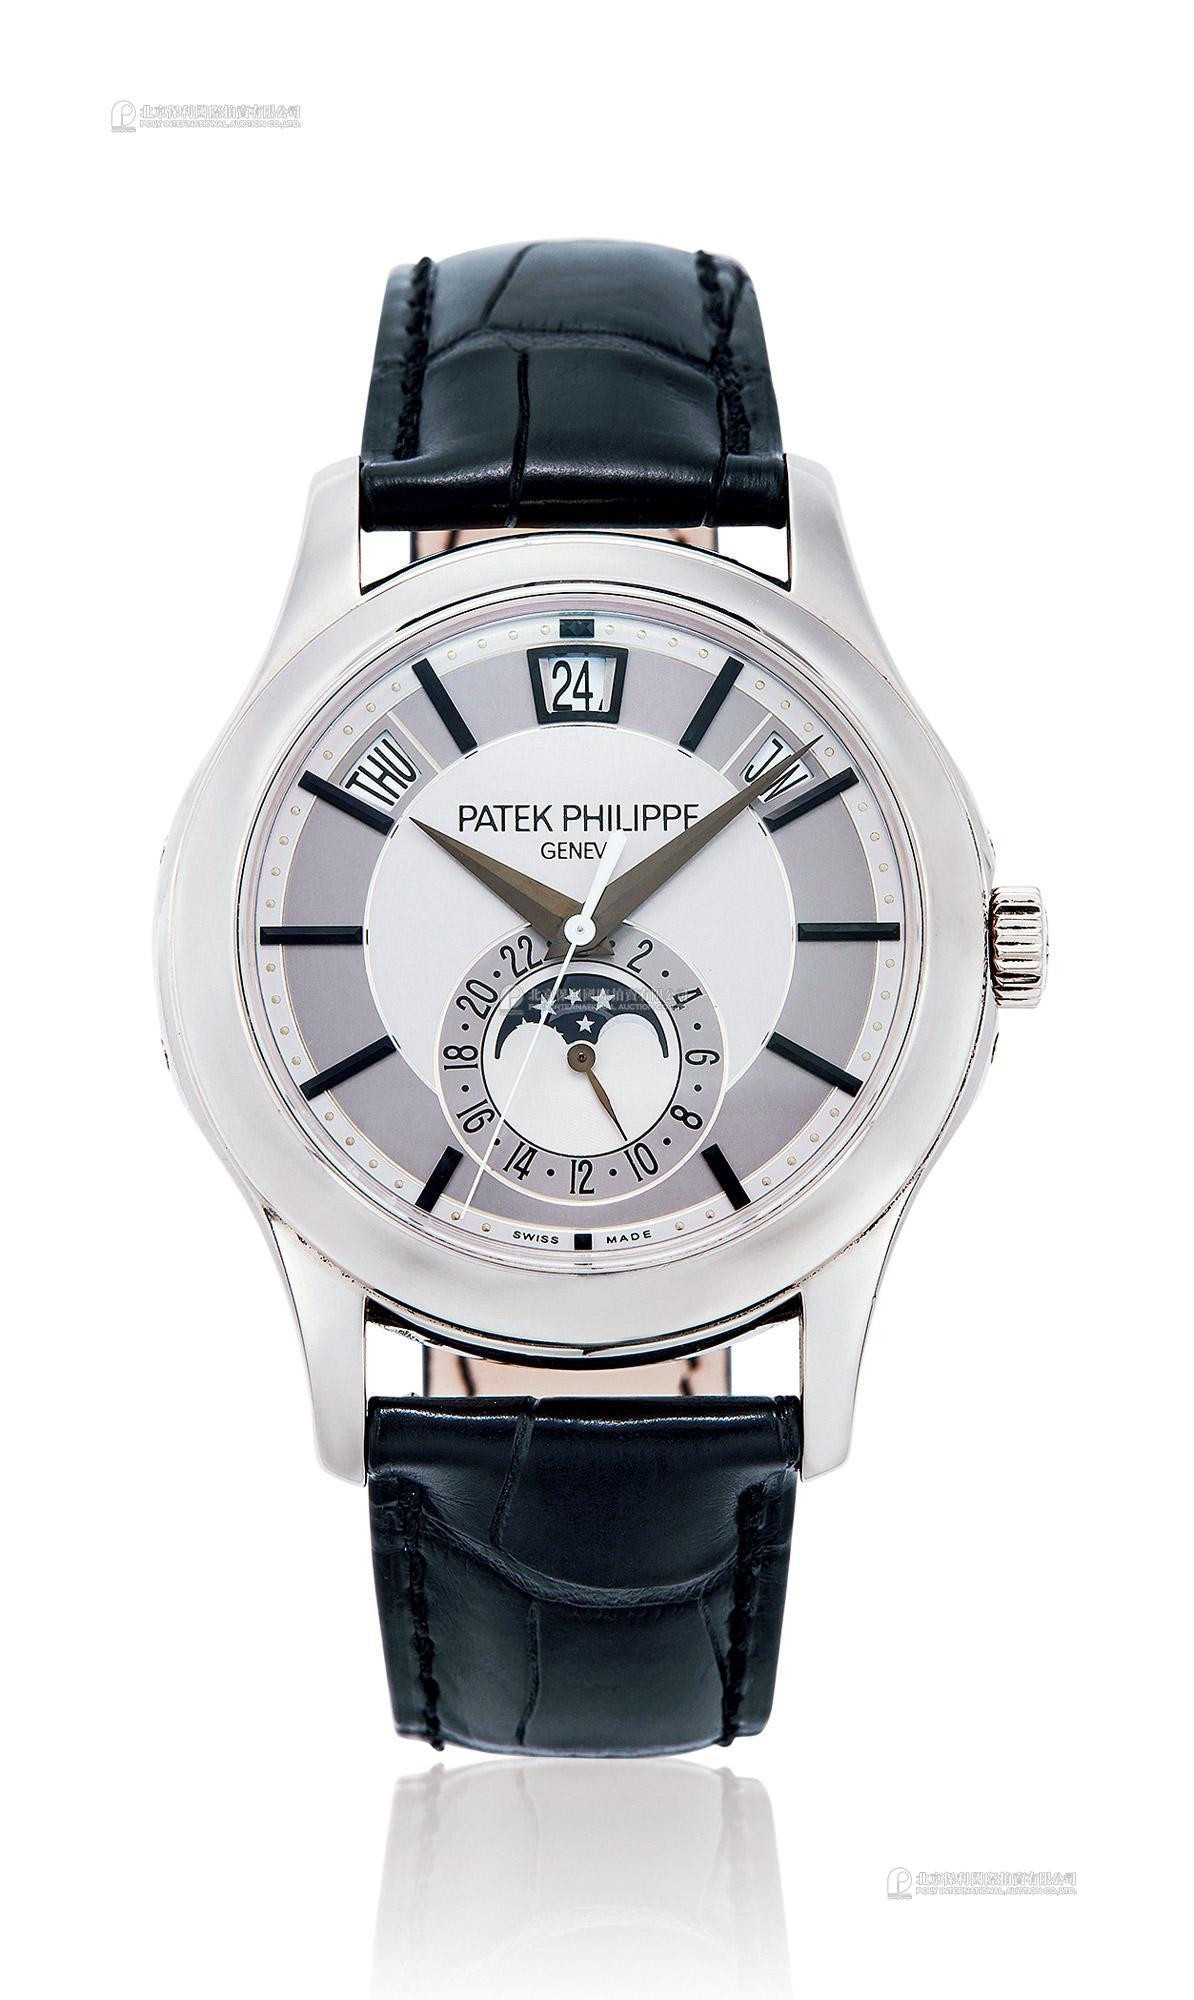 PATEK PHILIPPE A WHITE GOLD CALENDAR AUTOMATIC WRISTWATCH WITH MOON-PHASE INDICATION